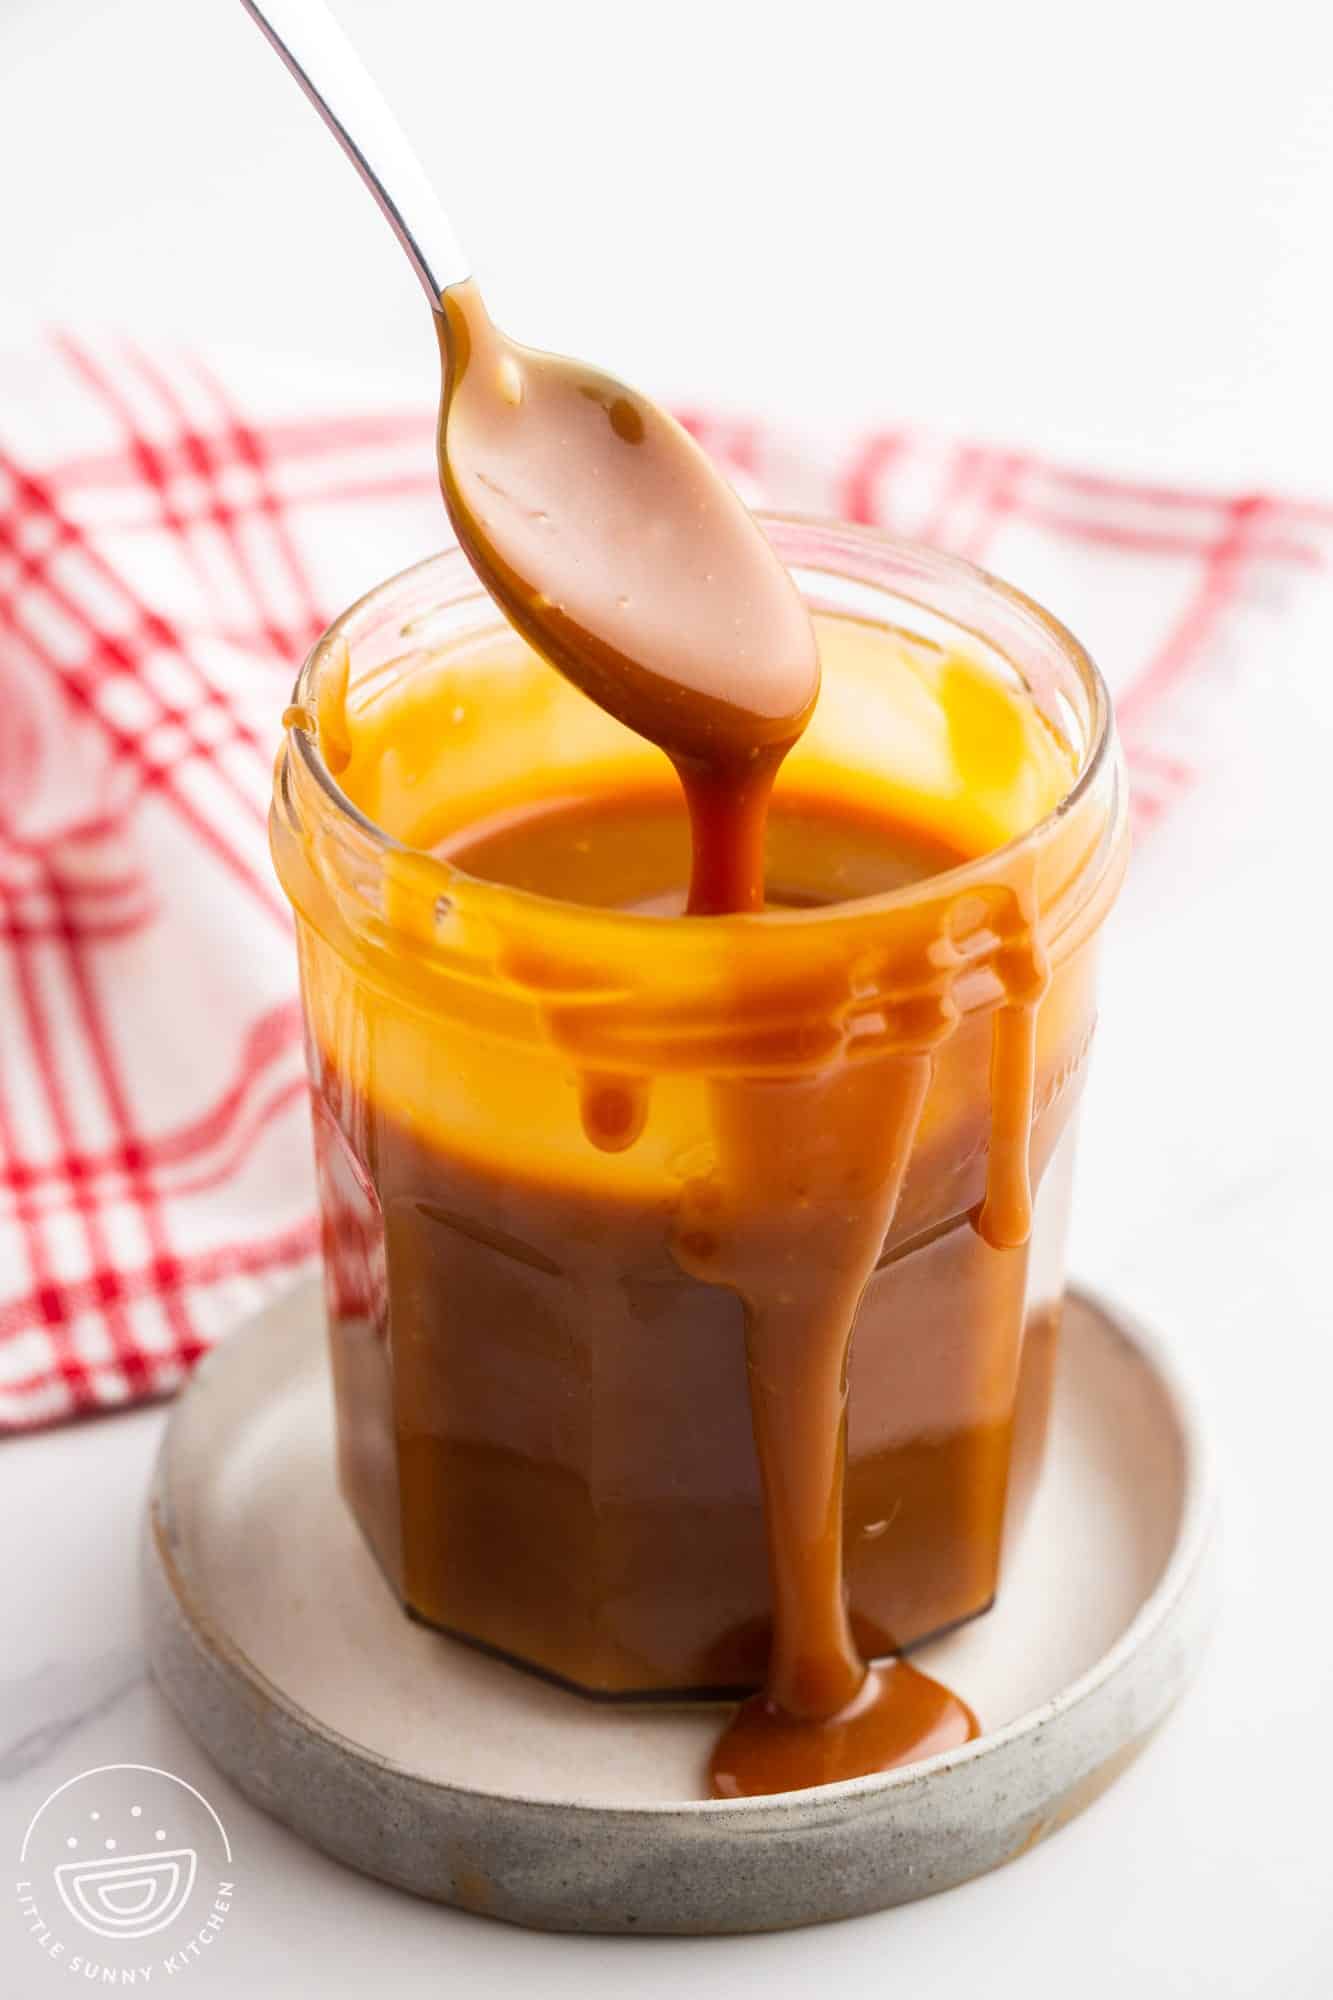 Caramel sauce in a jar with a spoon.